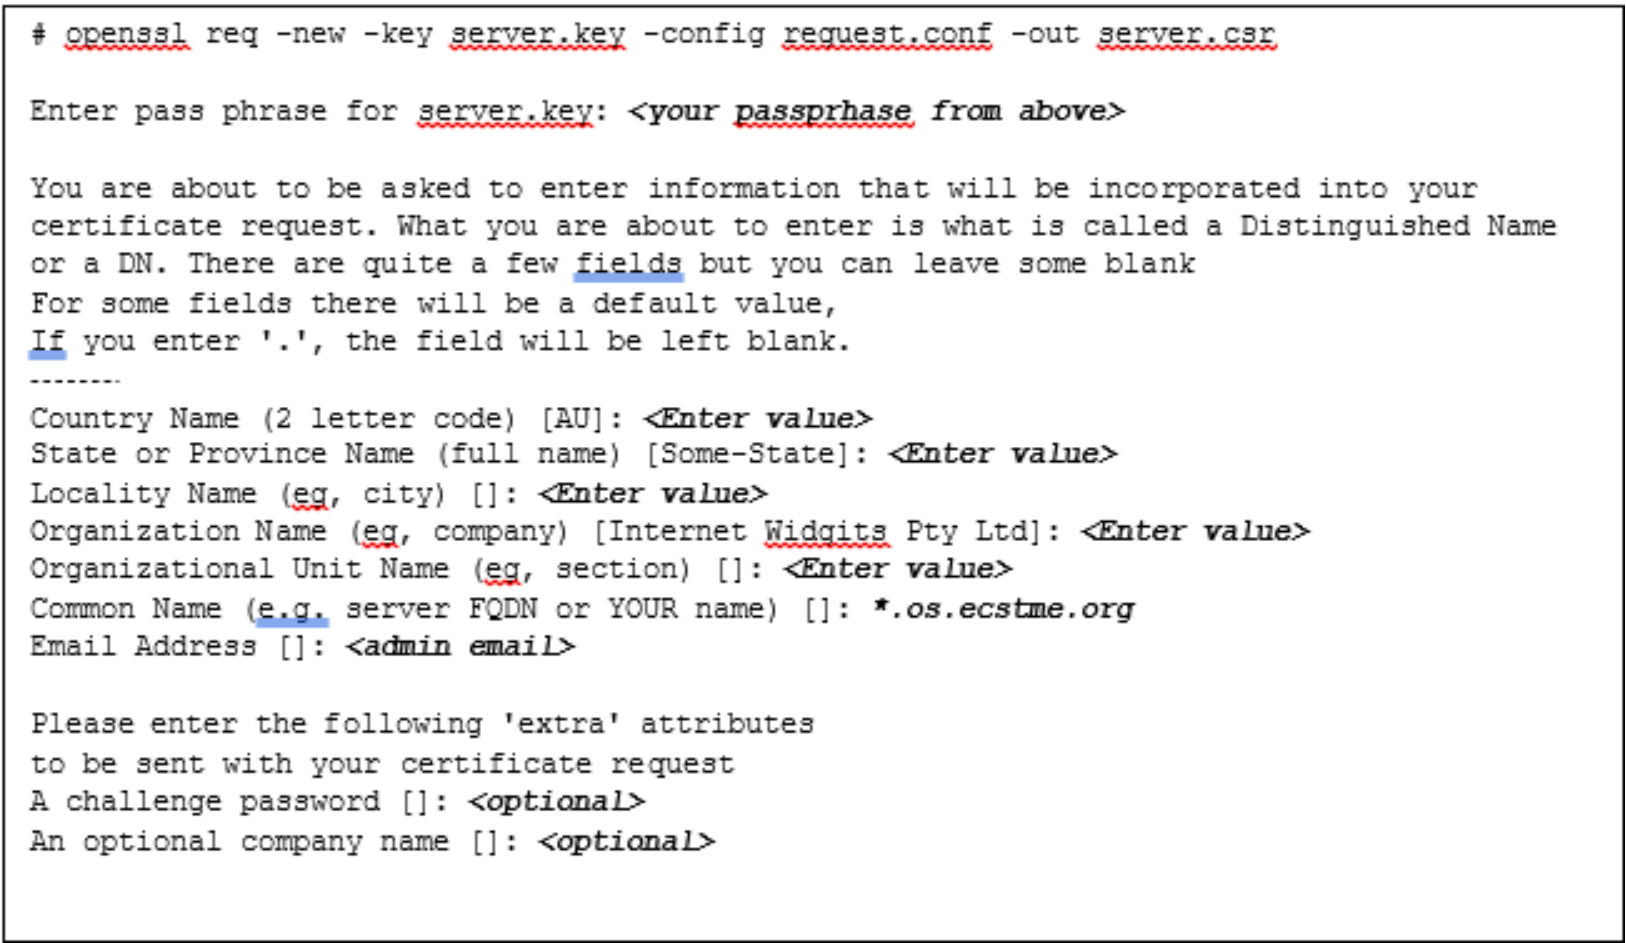 This is an example of the command to generate a Certificate Signing Request.